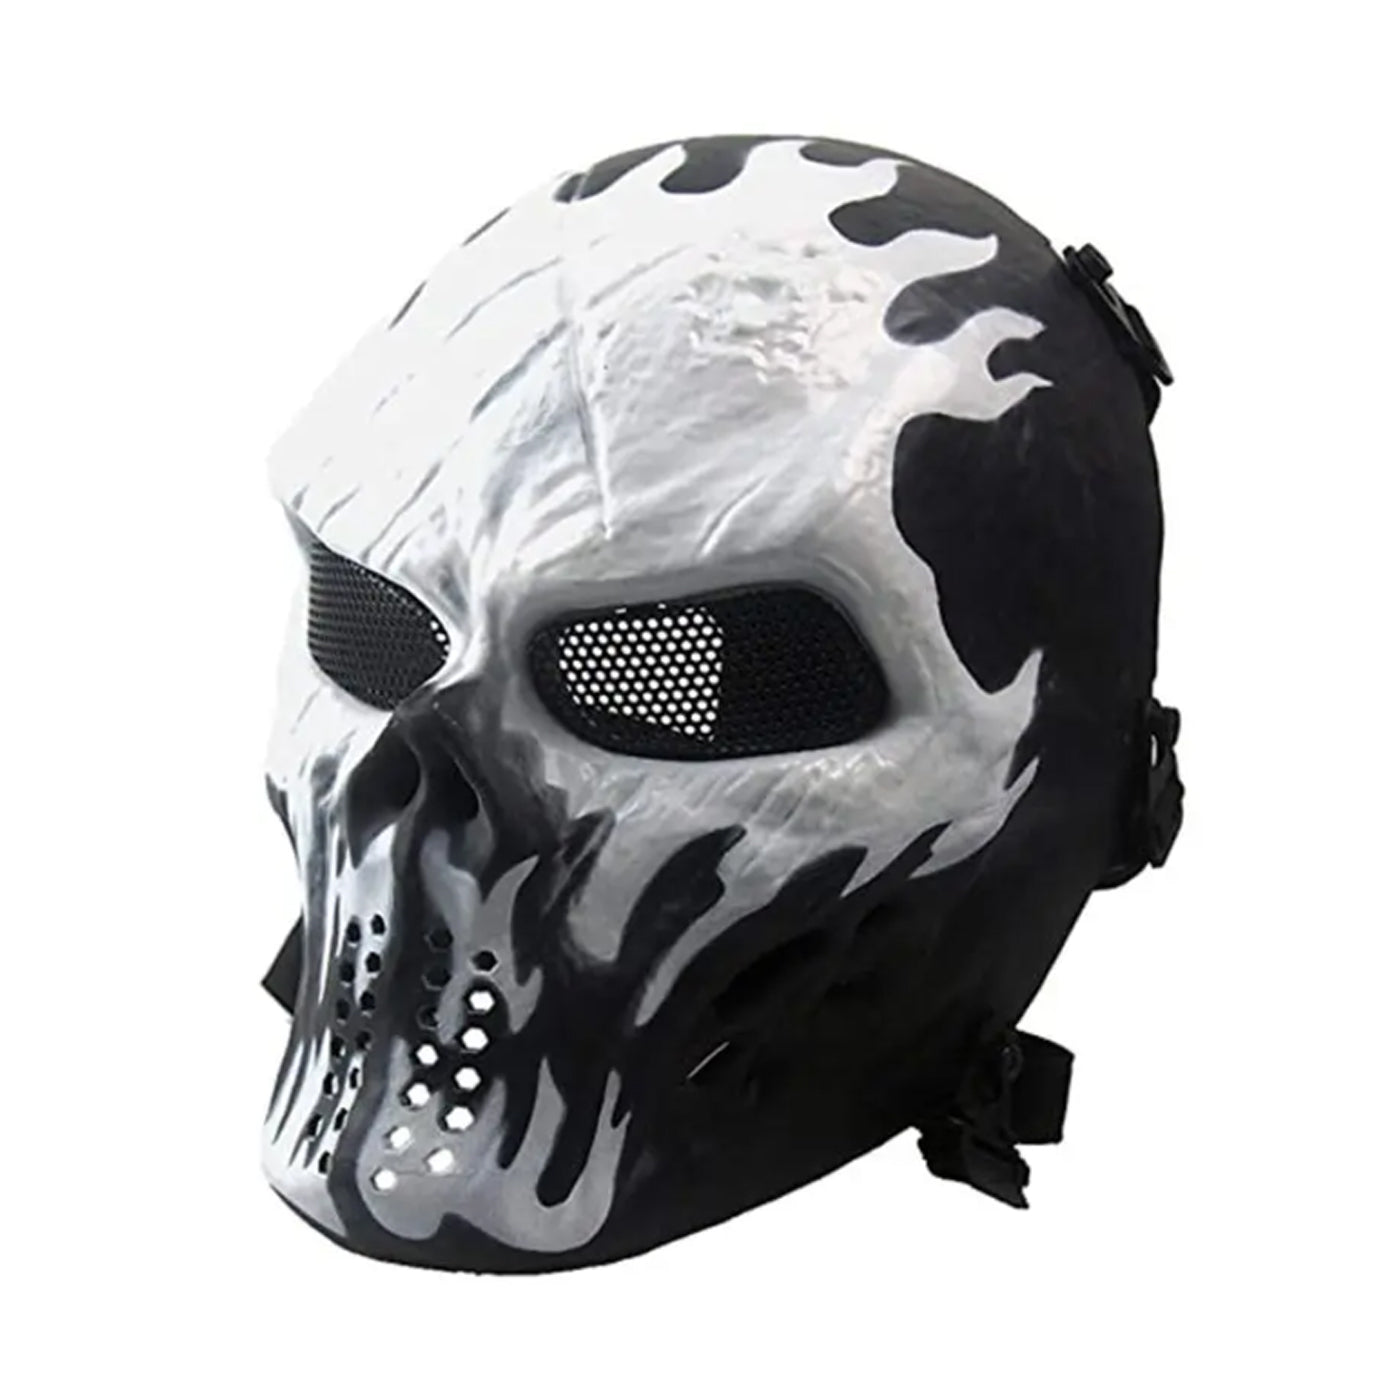 Flames Team Painted Scary Halloween Party Full Face Airsoft Mask